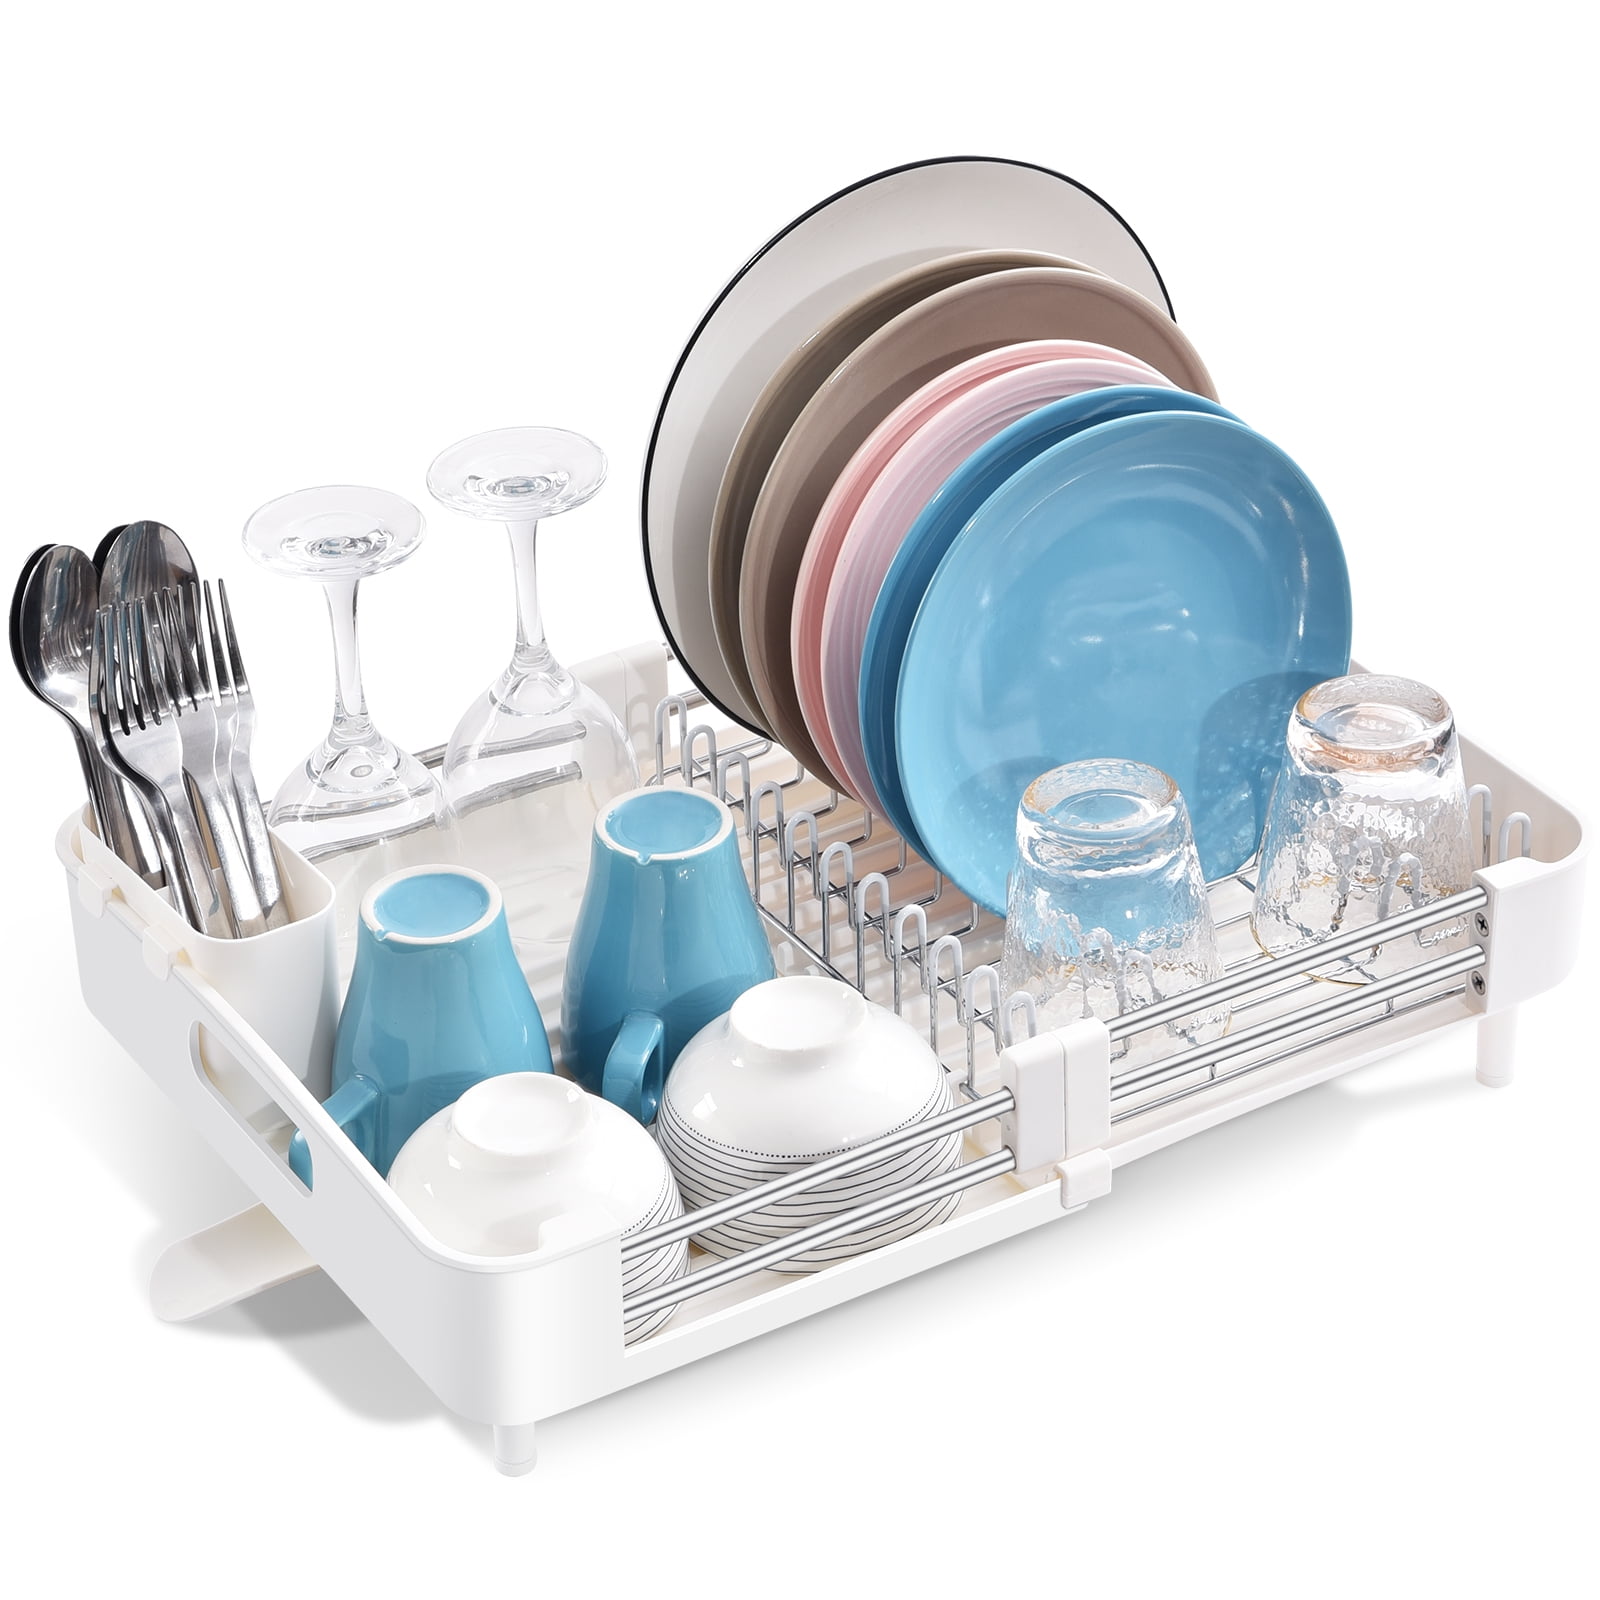 Dropship Expandable Dish Drying Rack Adjustable Dual-Part Dish Drainer With  Detachable Utensil Holder to Sell Online at a Lower Price